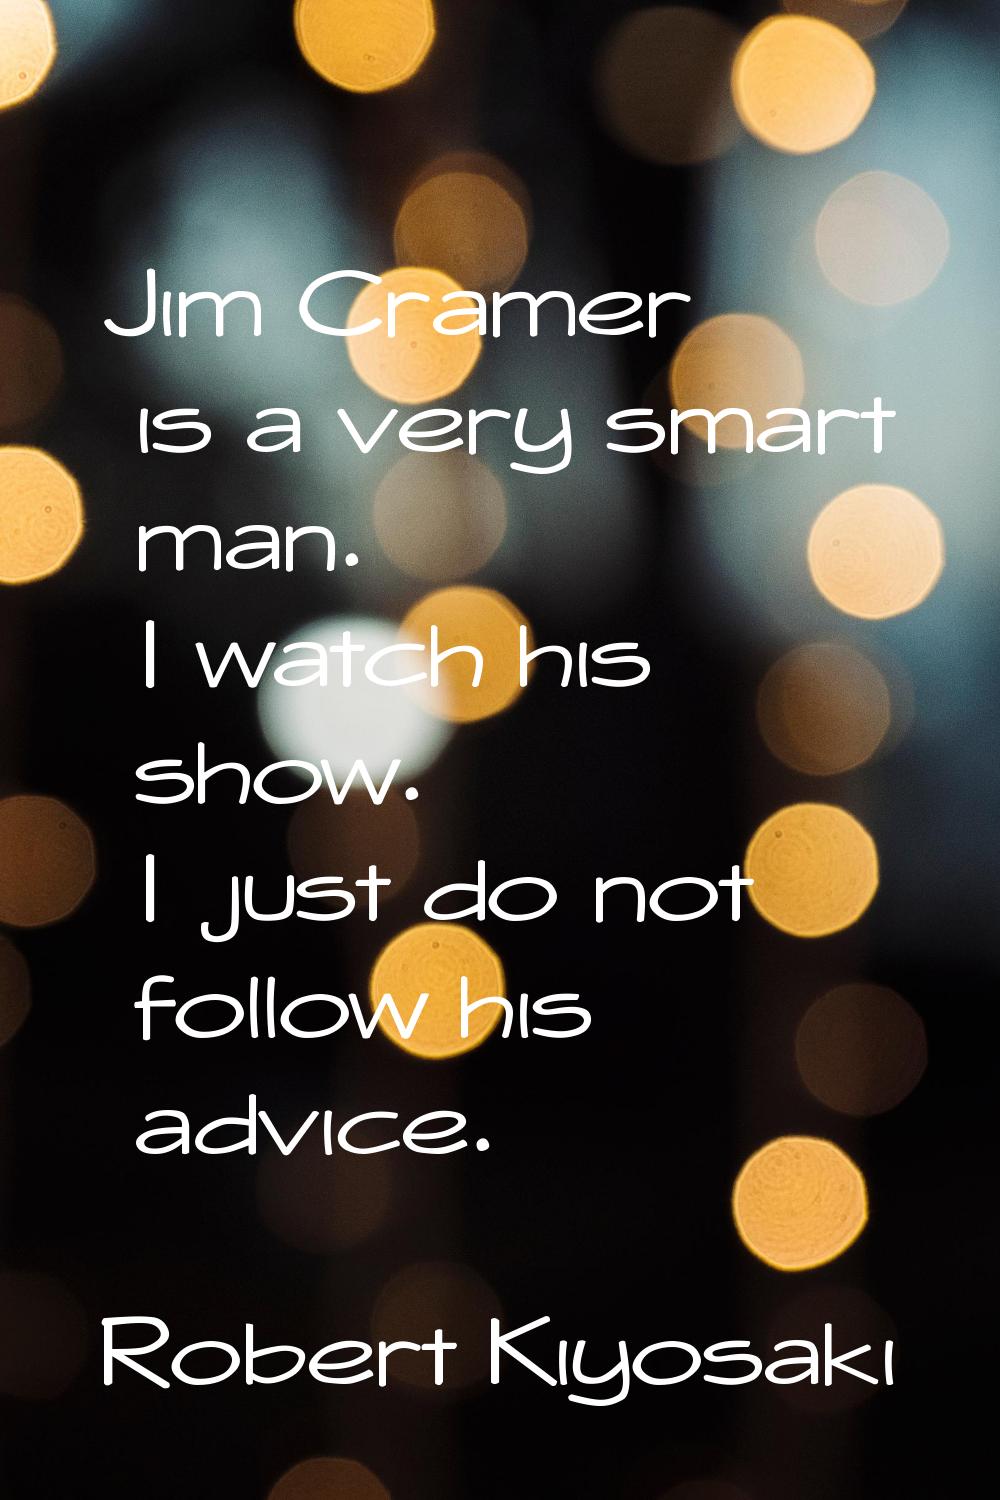 Jim Cramer is a very smart man. I watch his show. I just do not follow his advice.